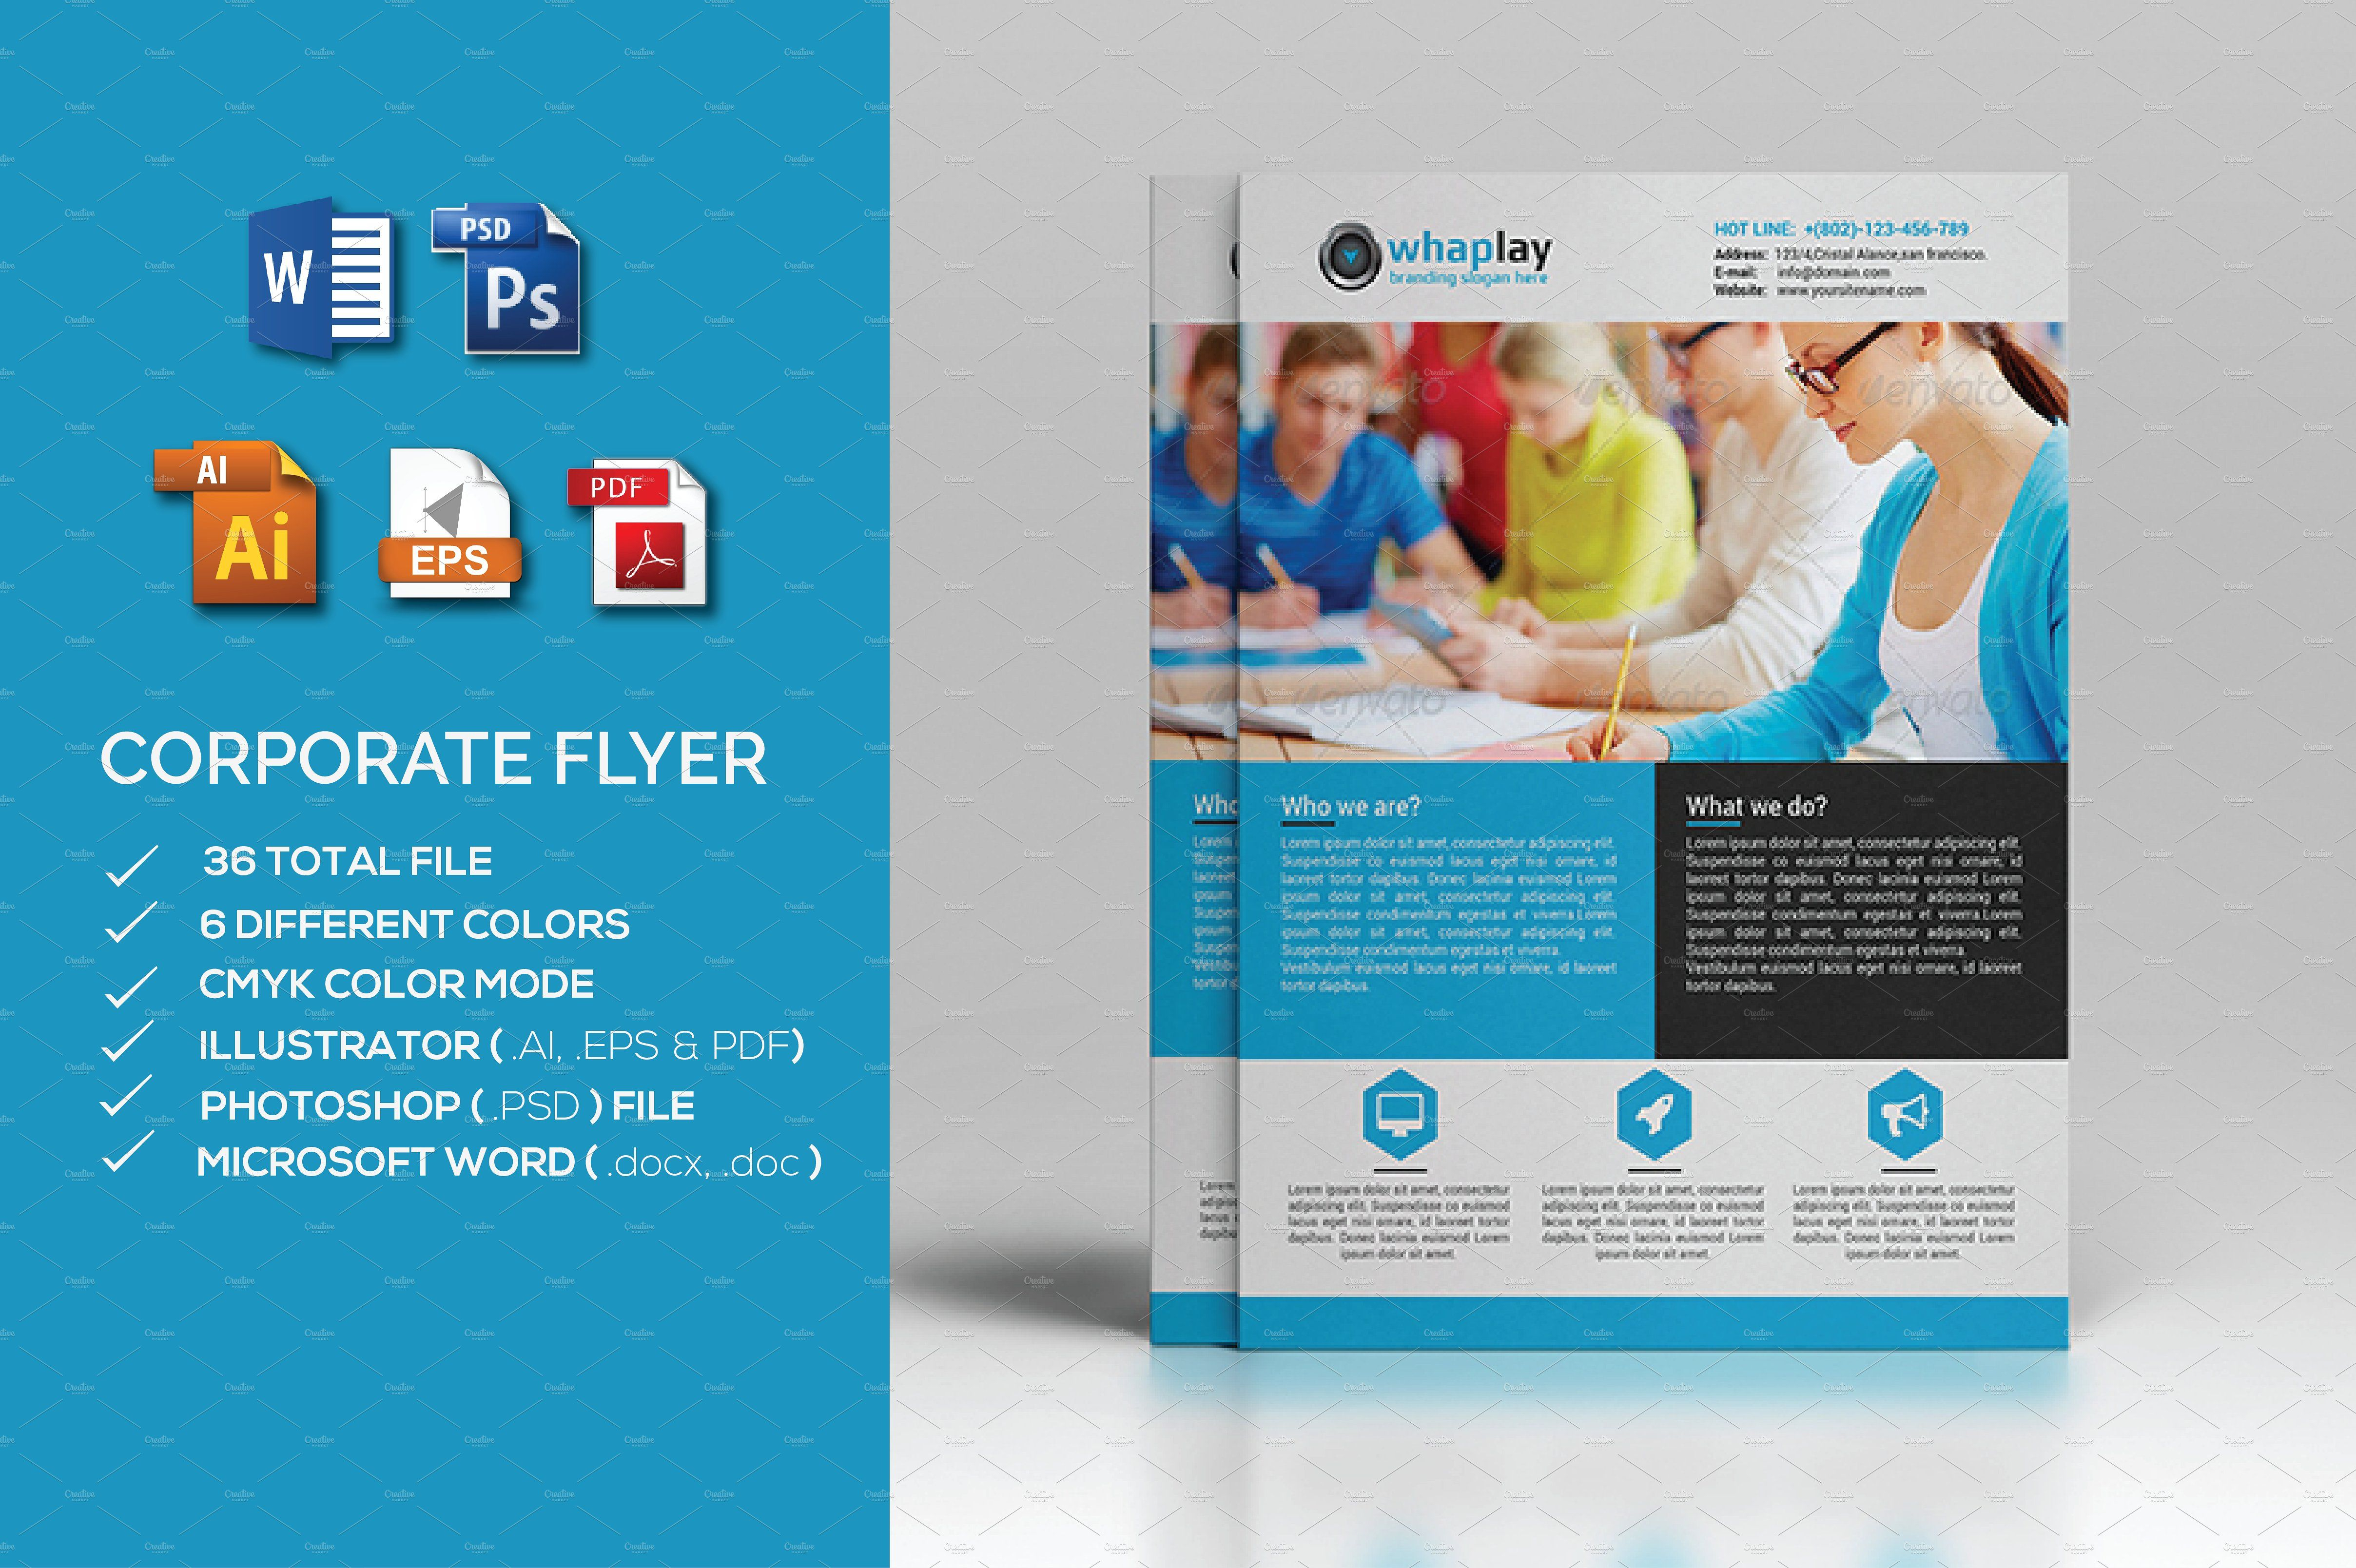 006 Template Ideas Microsoft Word Flyer Wondrous Templates Pertaining To Templates For Flyers In Word